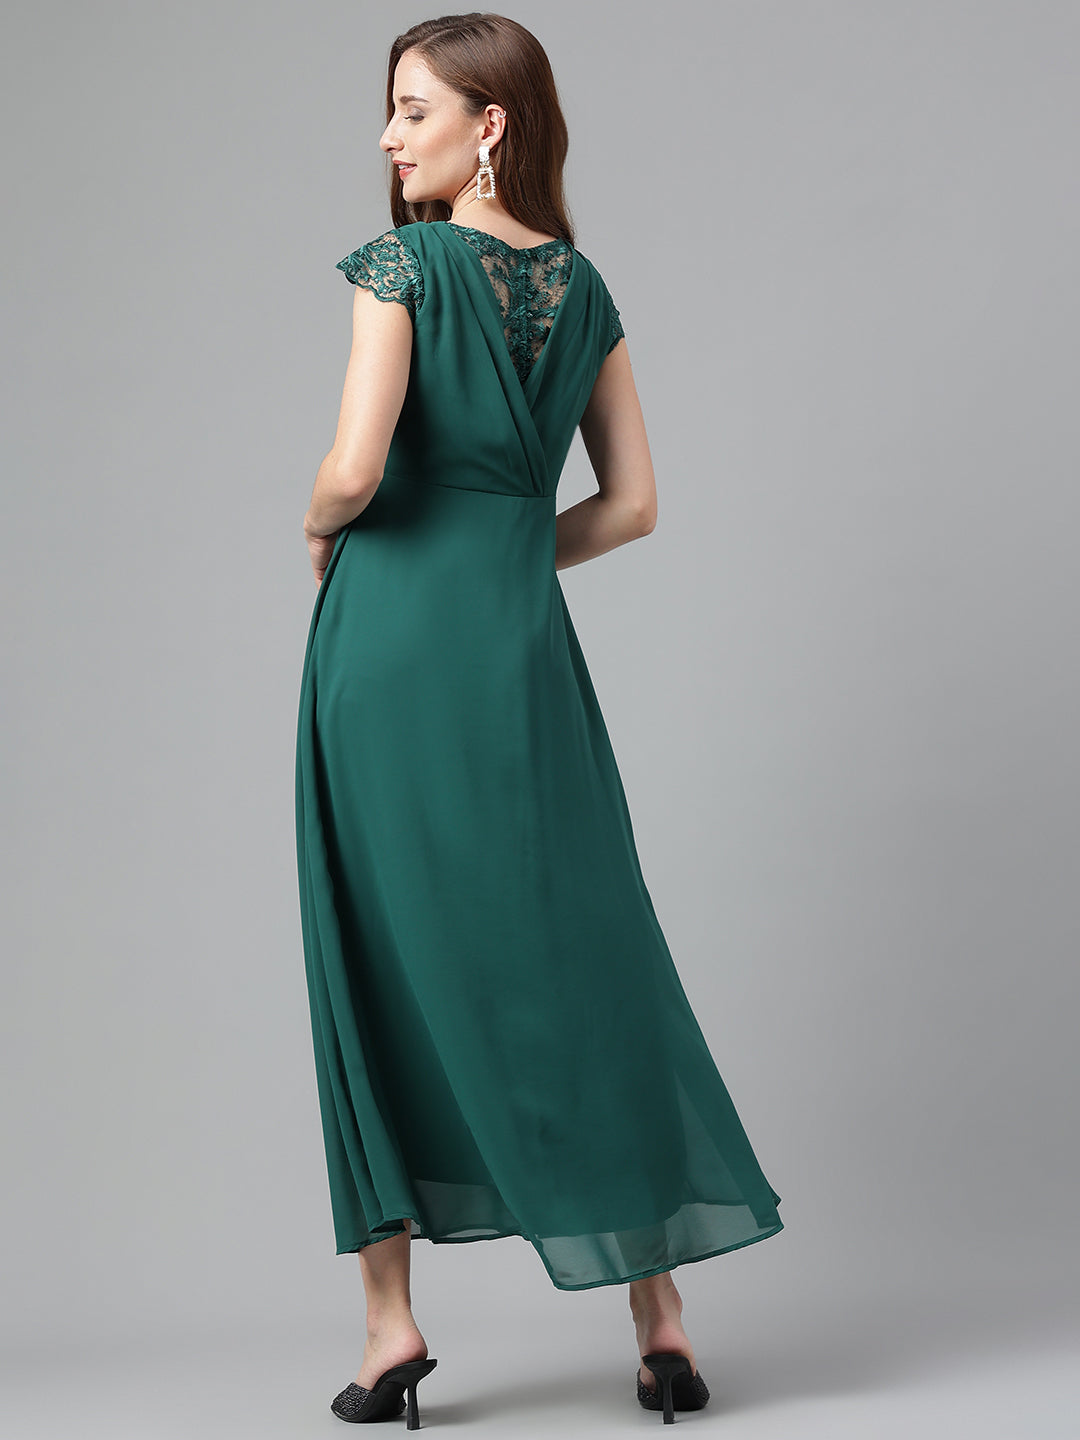 Greenforst Half Sleeves Round Neck Solid Maxi Dress For Casual Wear